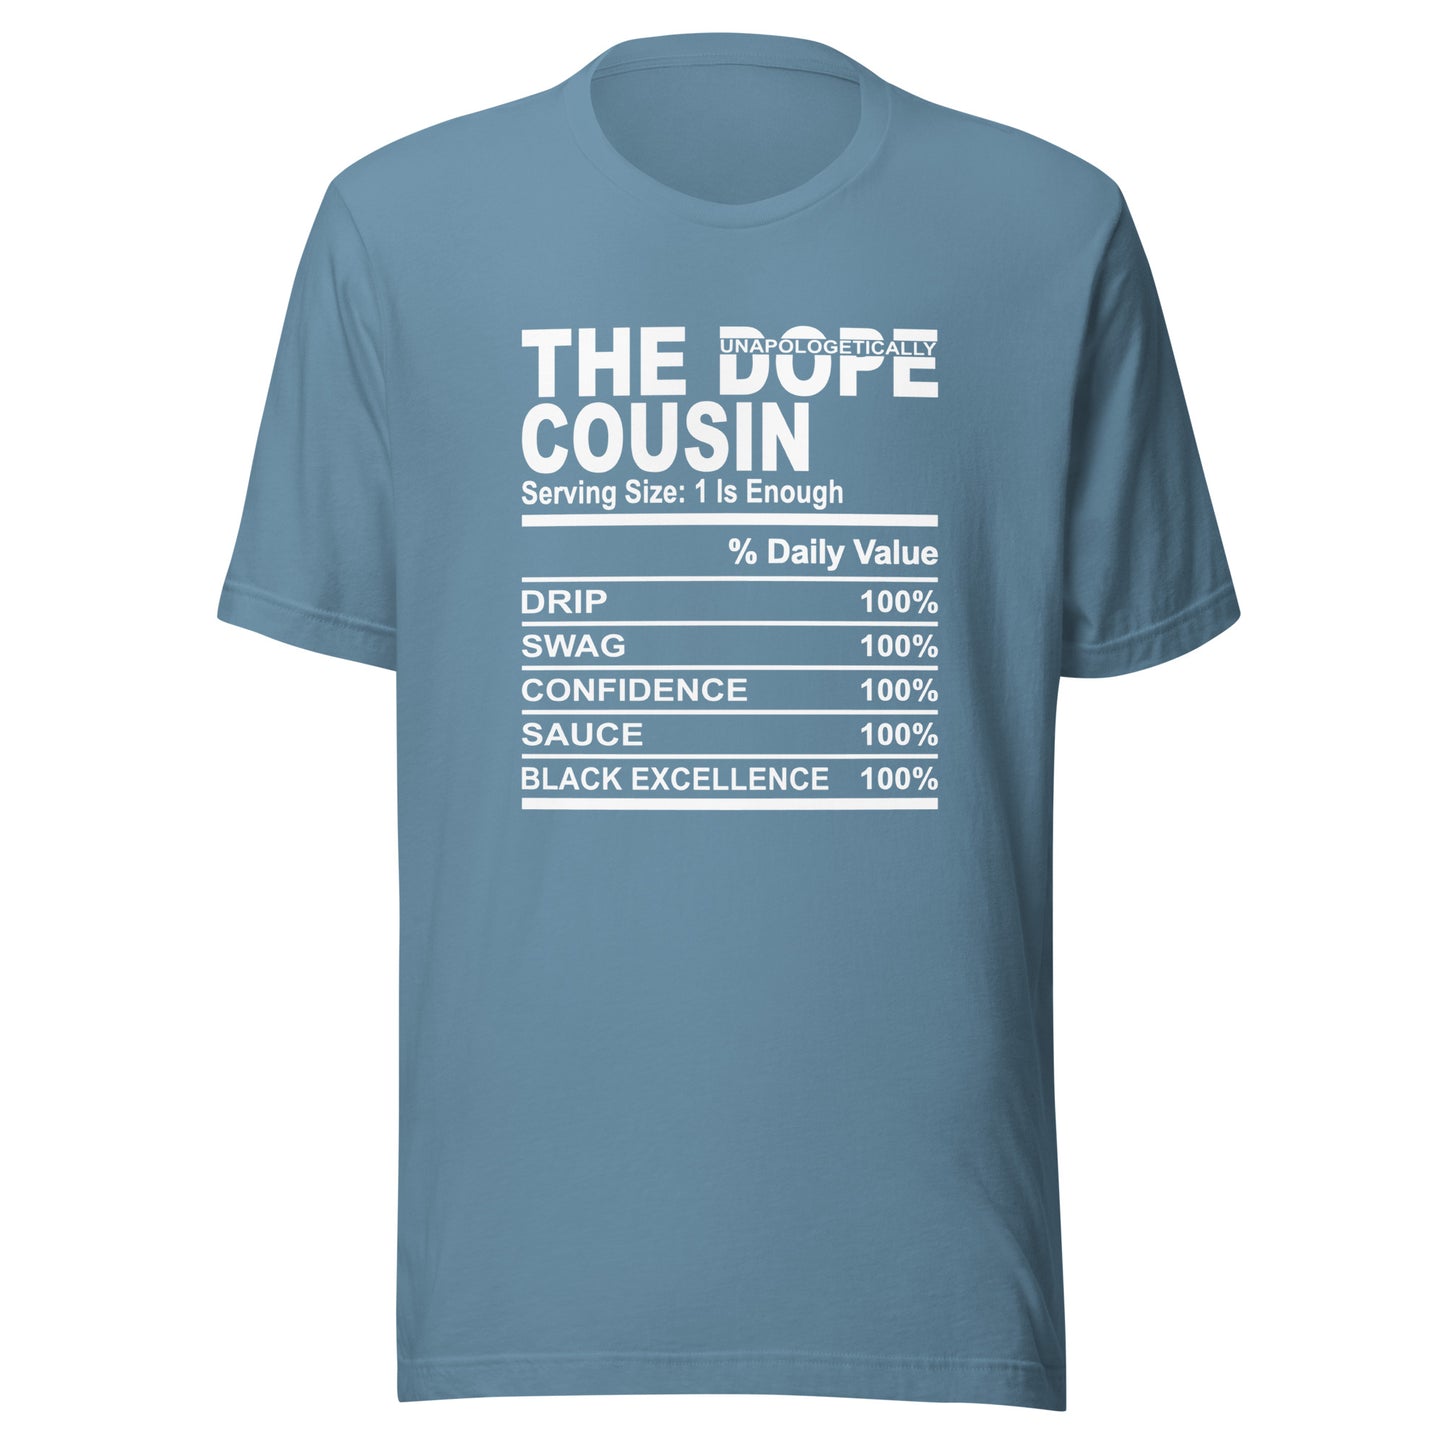 THE DOPE COUSIN (Unapologetically) - 4XL - Unisex T-Shirt (white print)